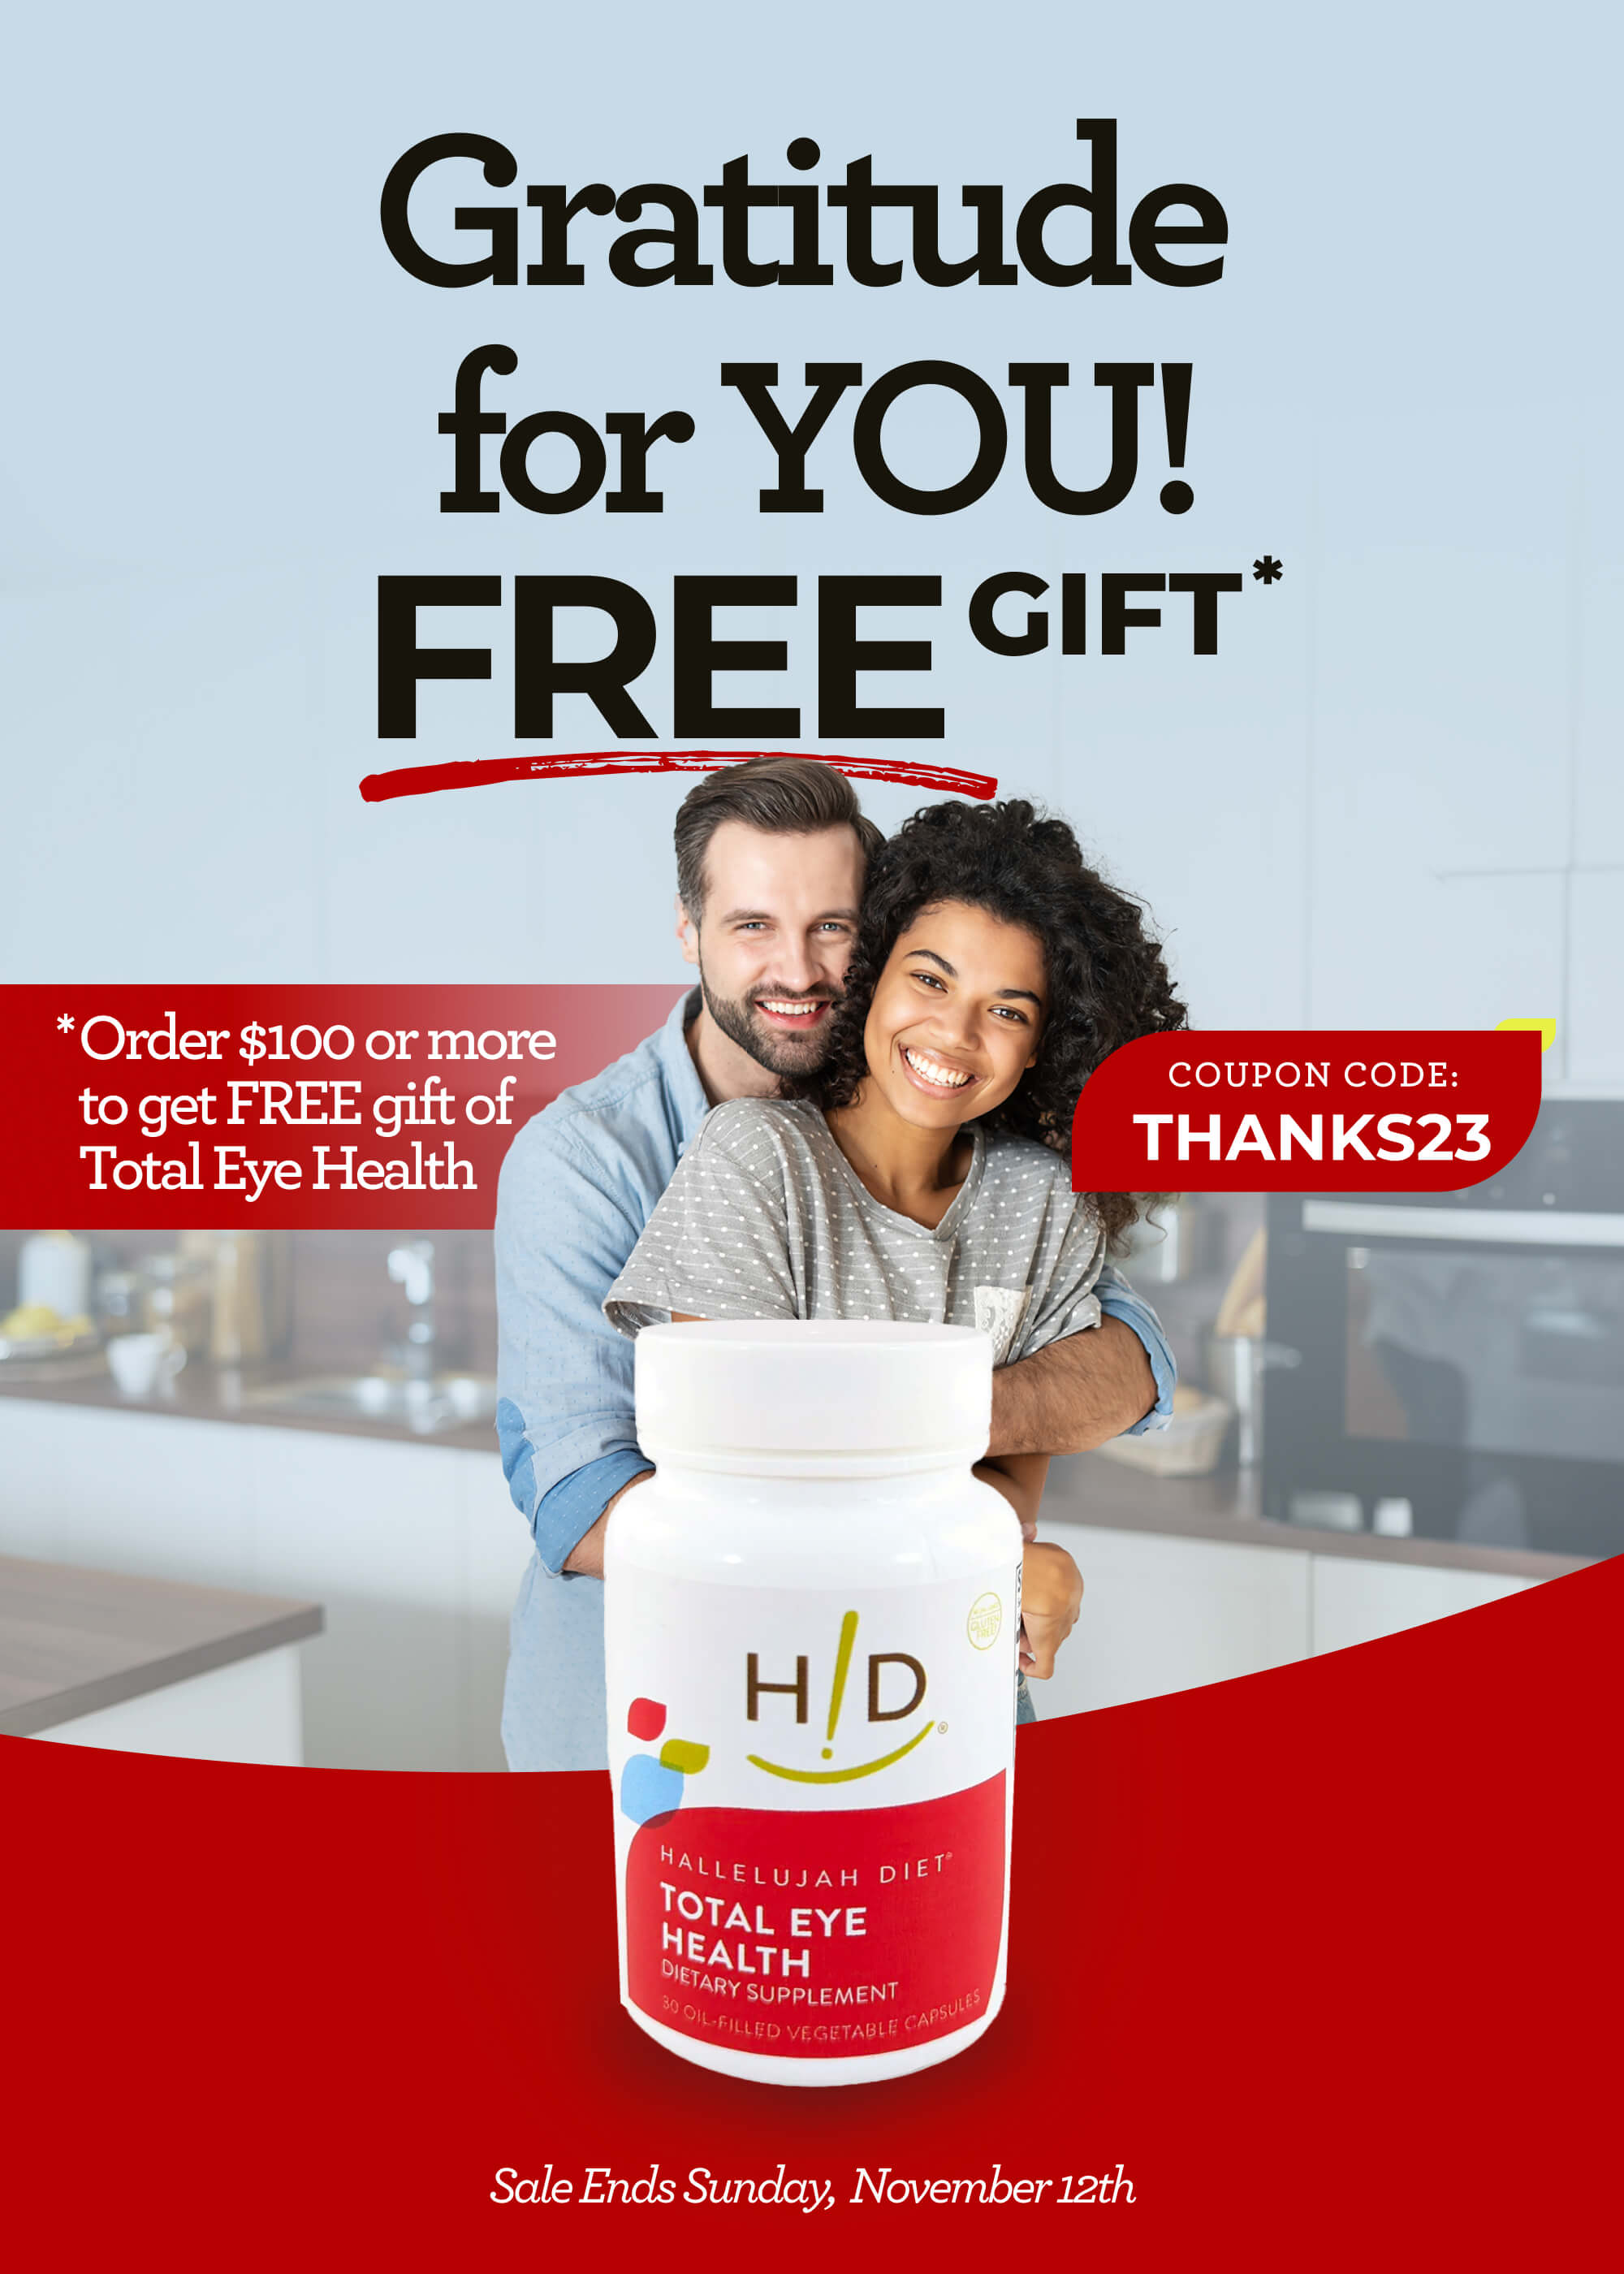 Hallelujah Diet Gratitude for You Sale - Happy man and woman hugging in the kitchen